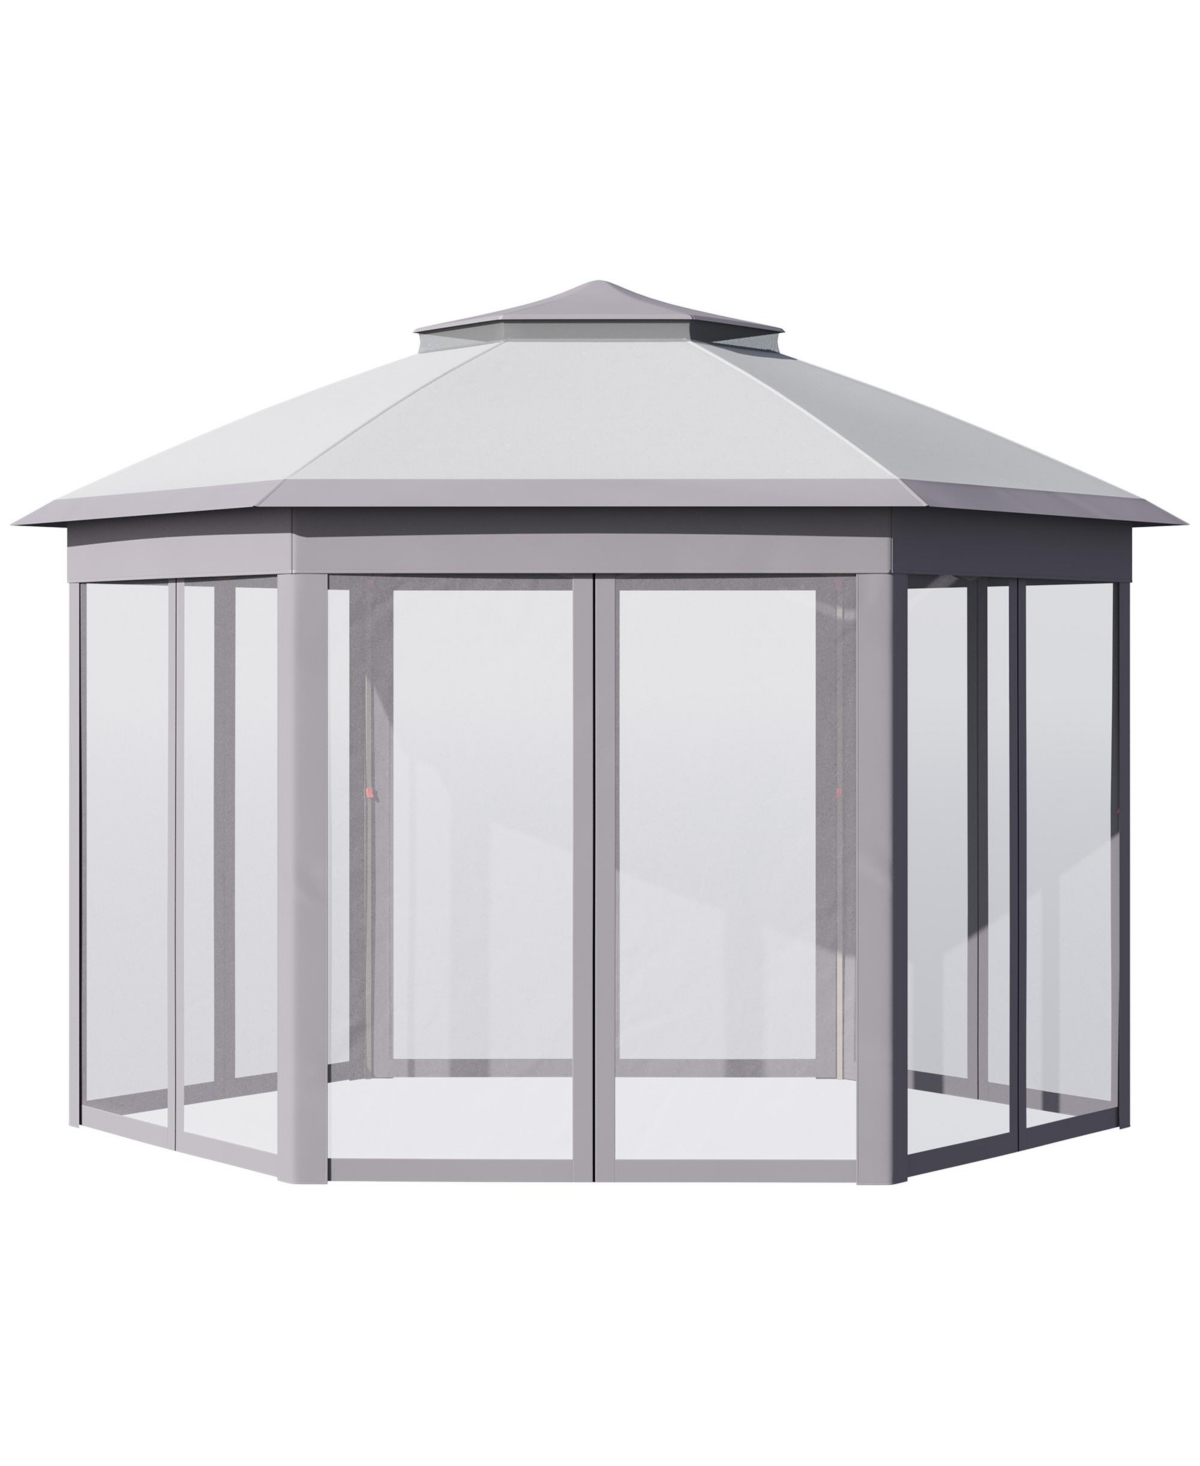 13'x11' Pop Up Gazebo, Double Roof Canopy Tent with Zippered Mesh Sidewalls, Height Adjustable and Carrying Bag, Event Tent for Patio Garden